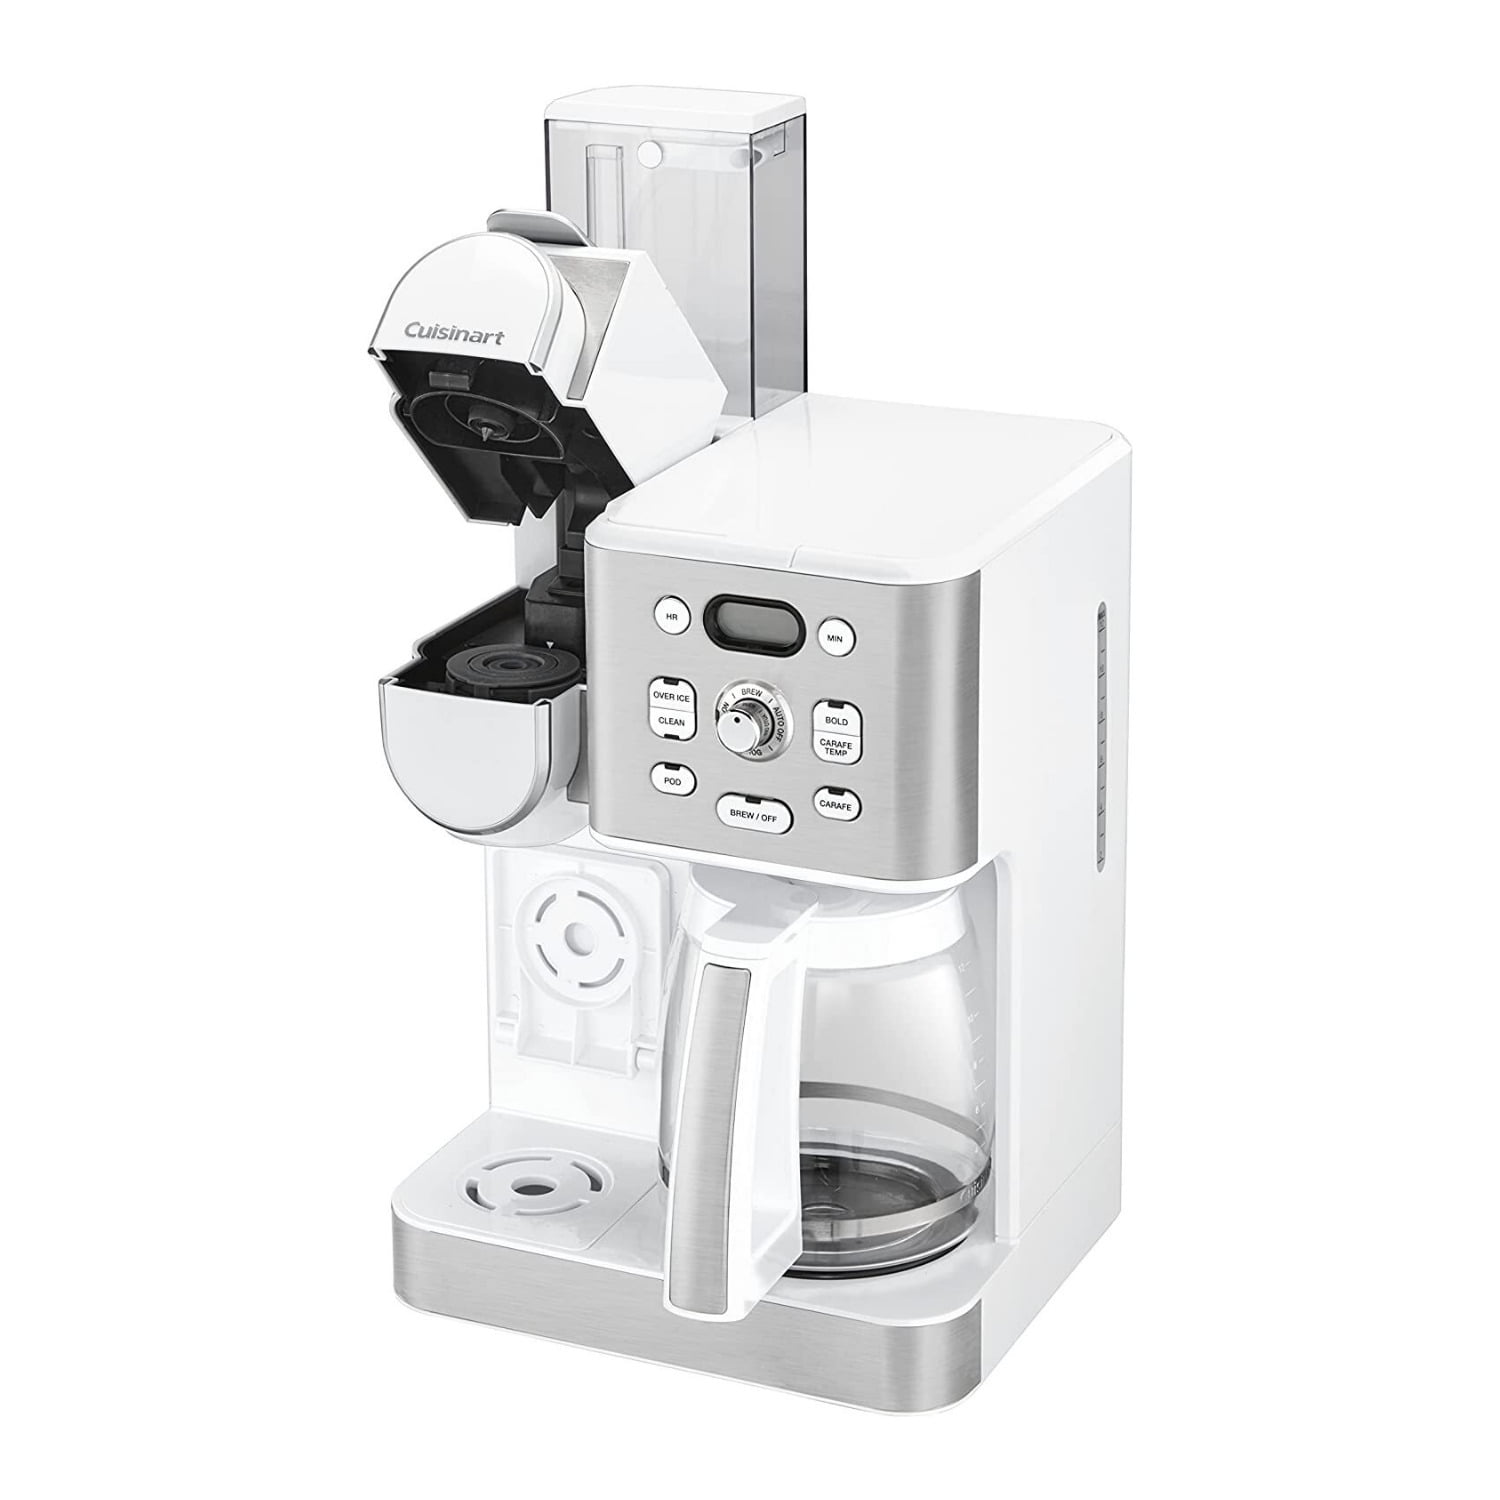  Cuisinart CTG-00-SMBW White Painted Stainless Steel